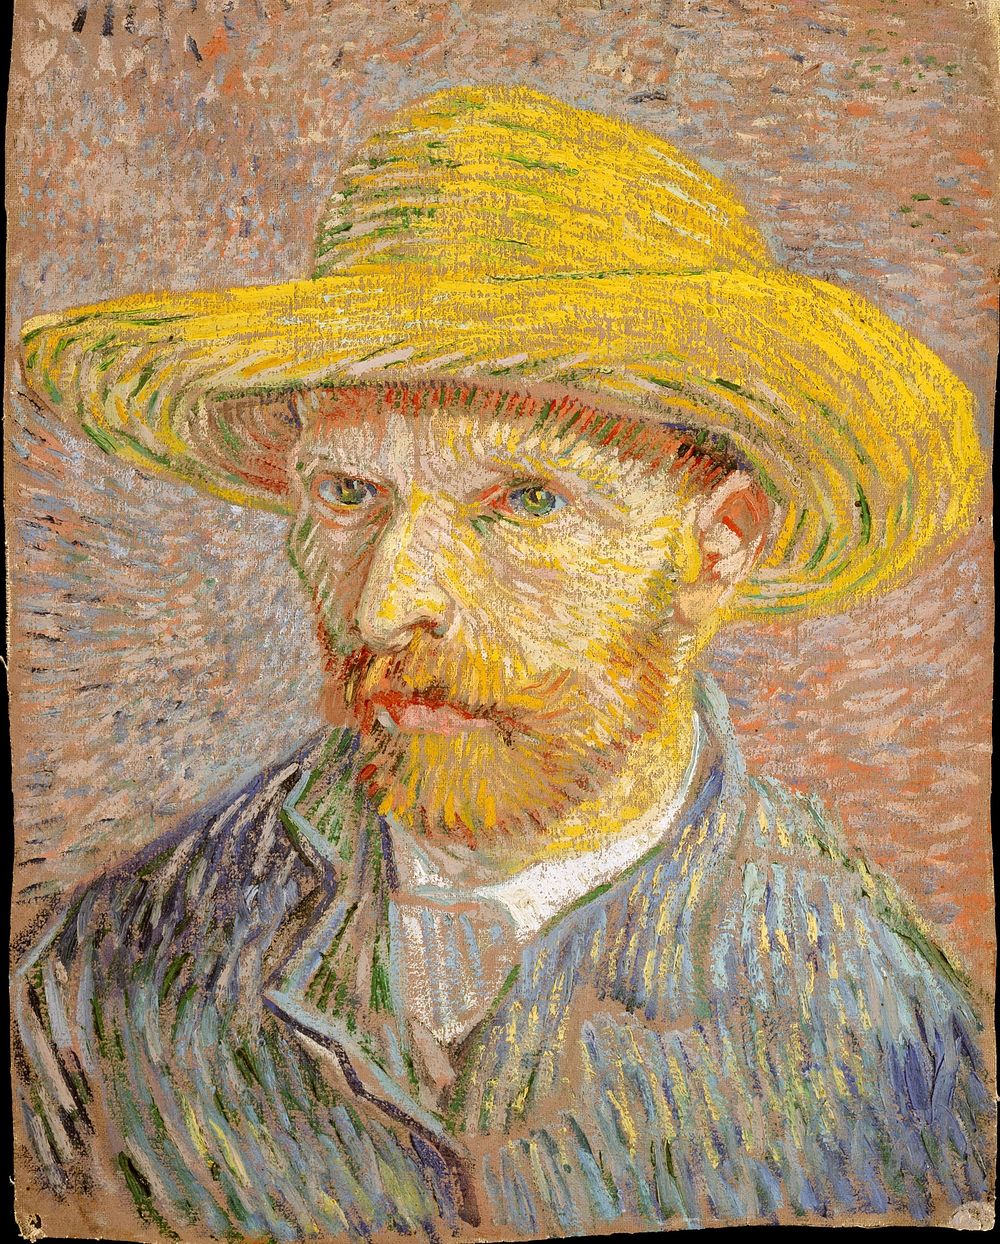 Self-Portrait with a Straw Hat (obverse: The Potato Peeler) by Vincent van Gogh